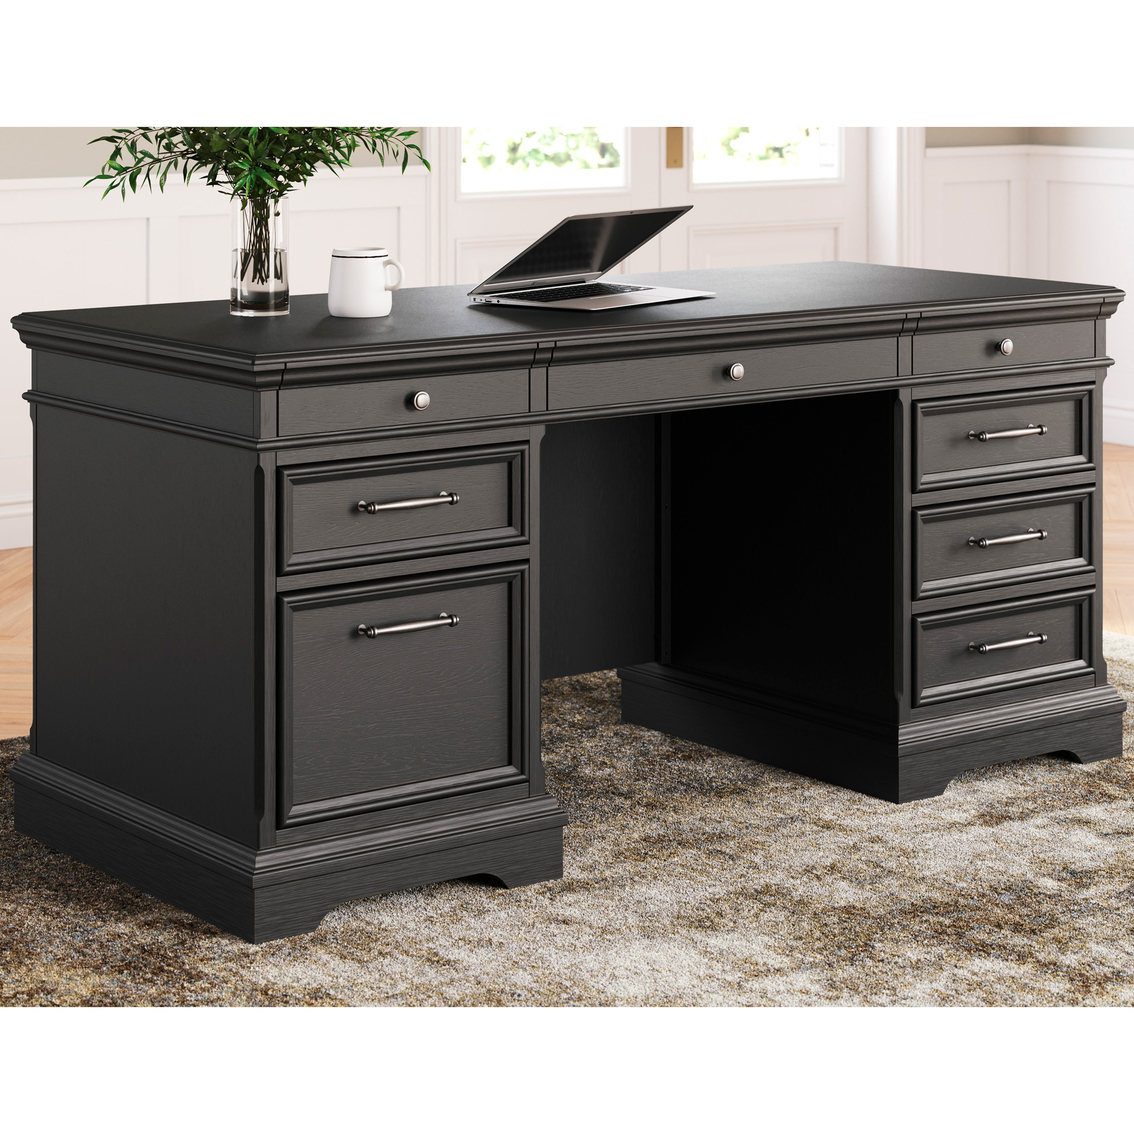 Signature Design by Ashley Beckincreek 66 in. Executive Office Desk - Image 6 of 7